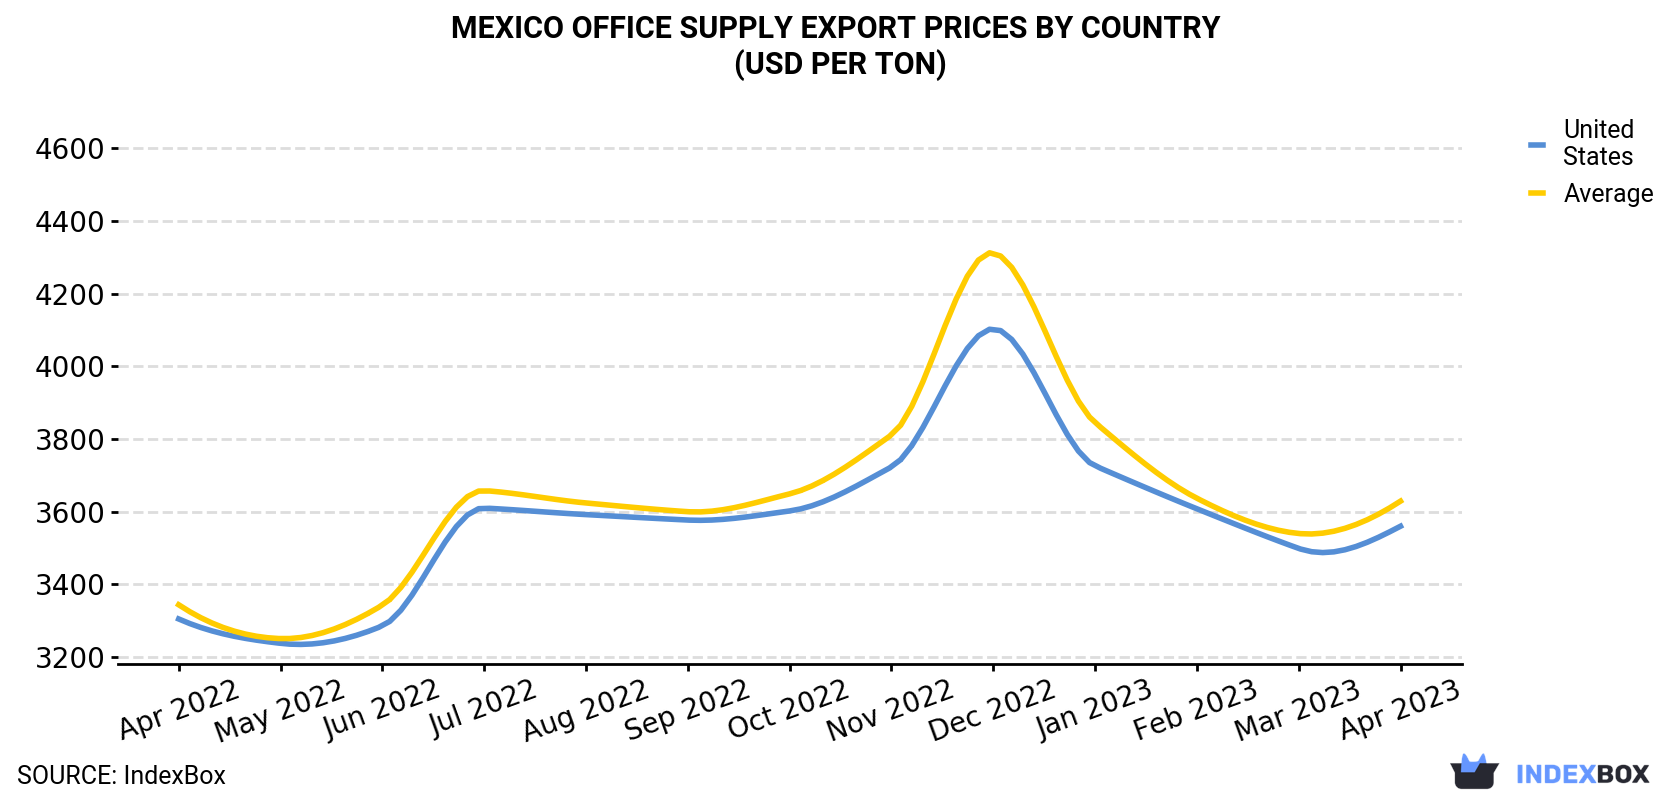 Mexico Office Supply Export Prices By Country (USD Per Ton)